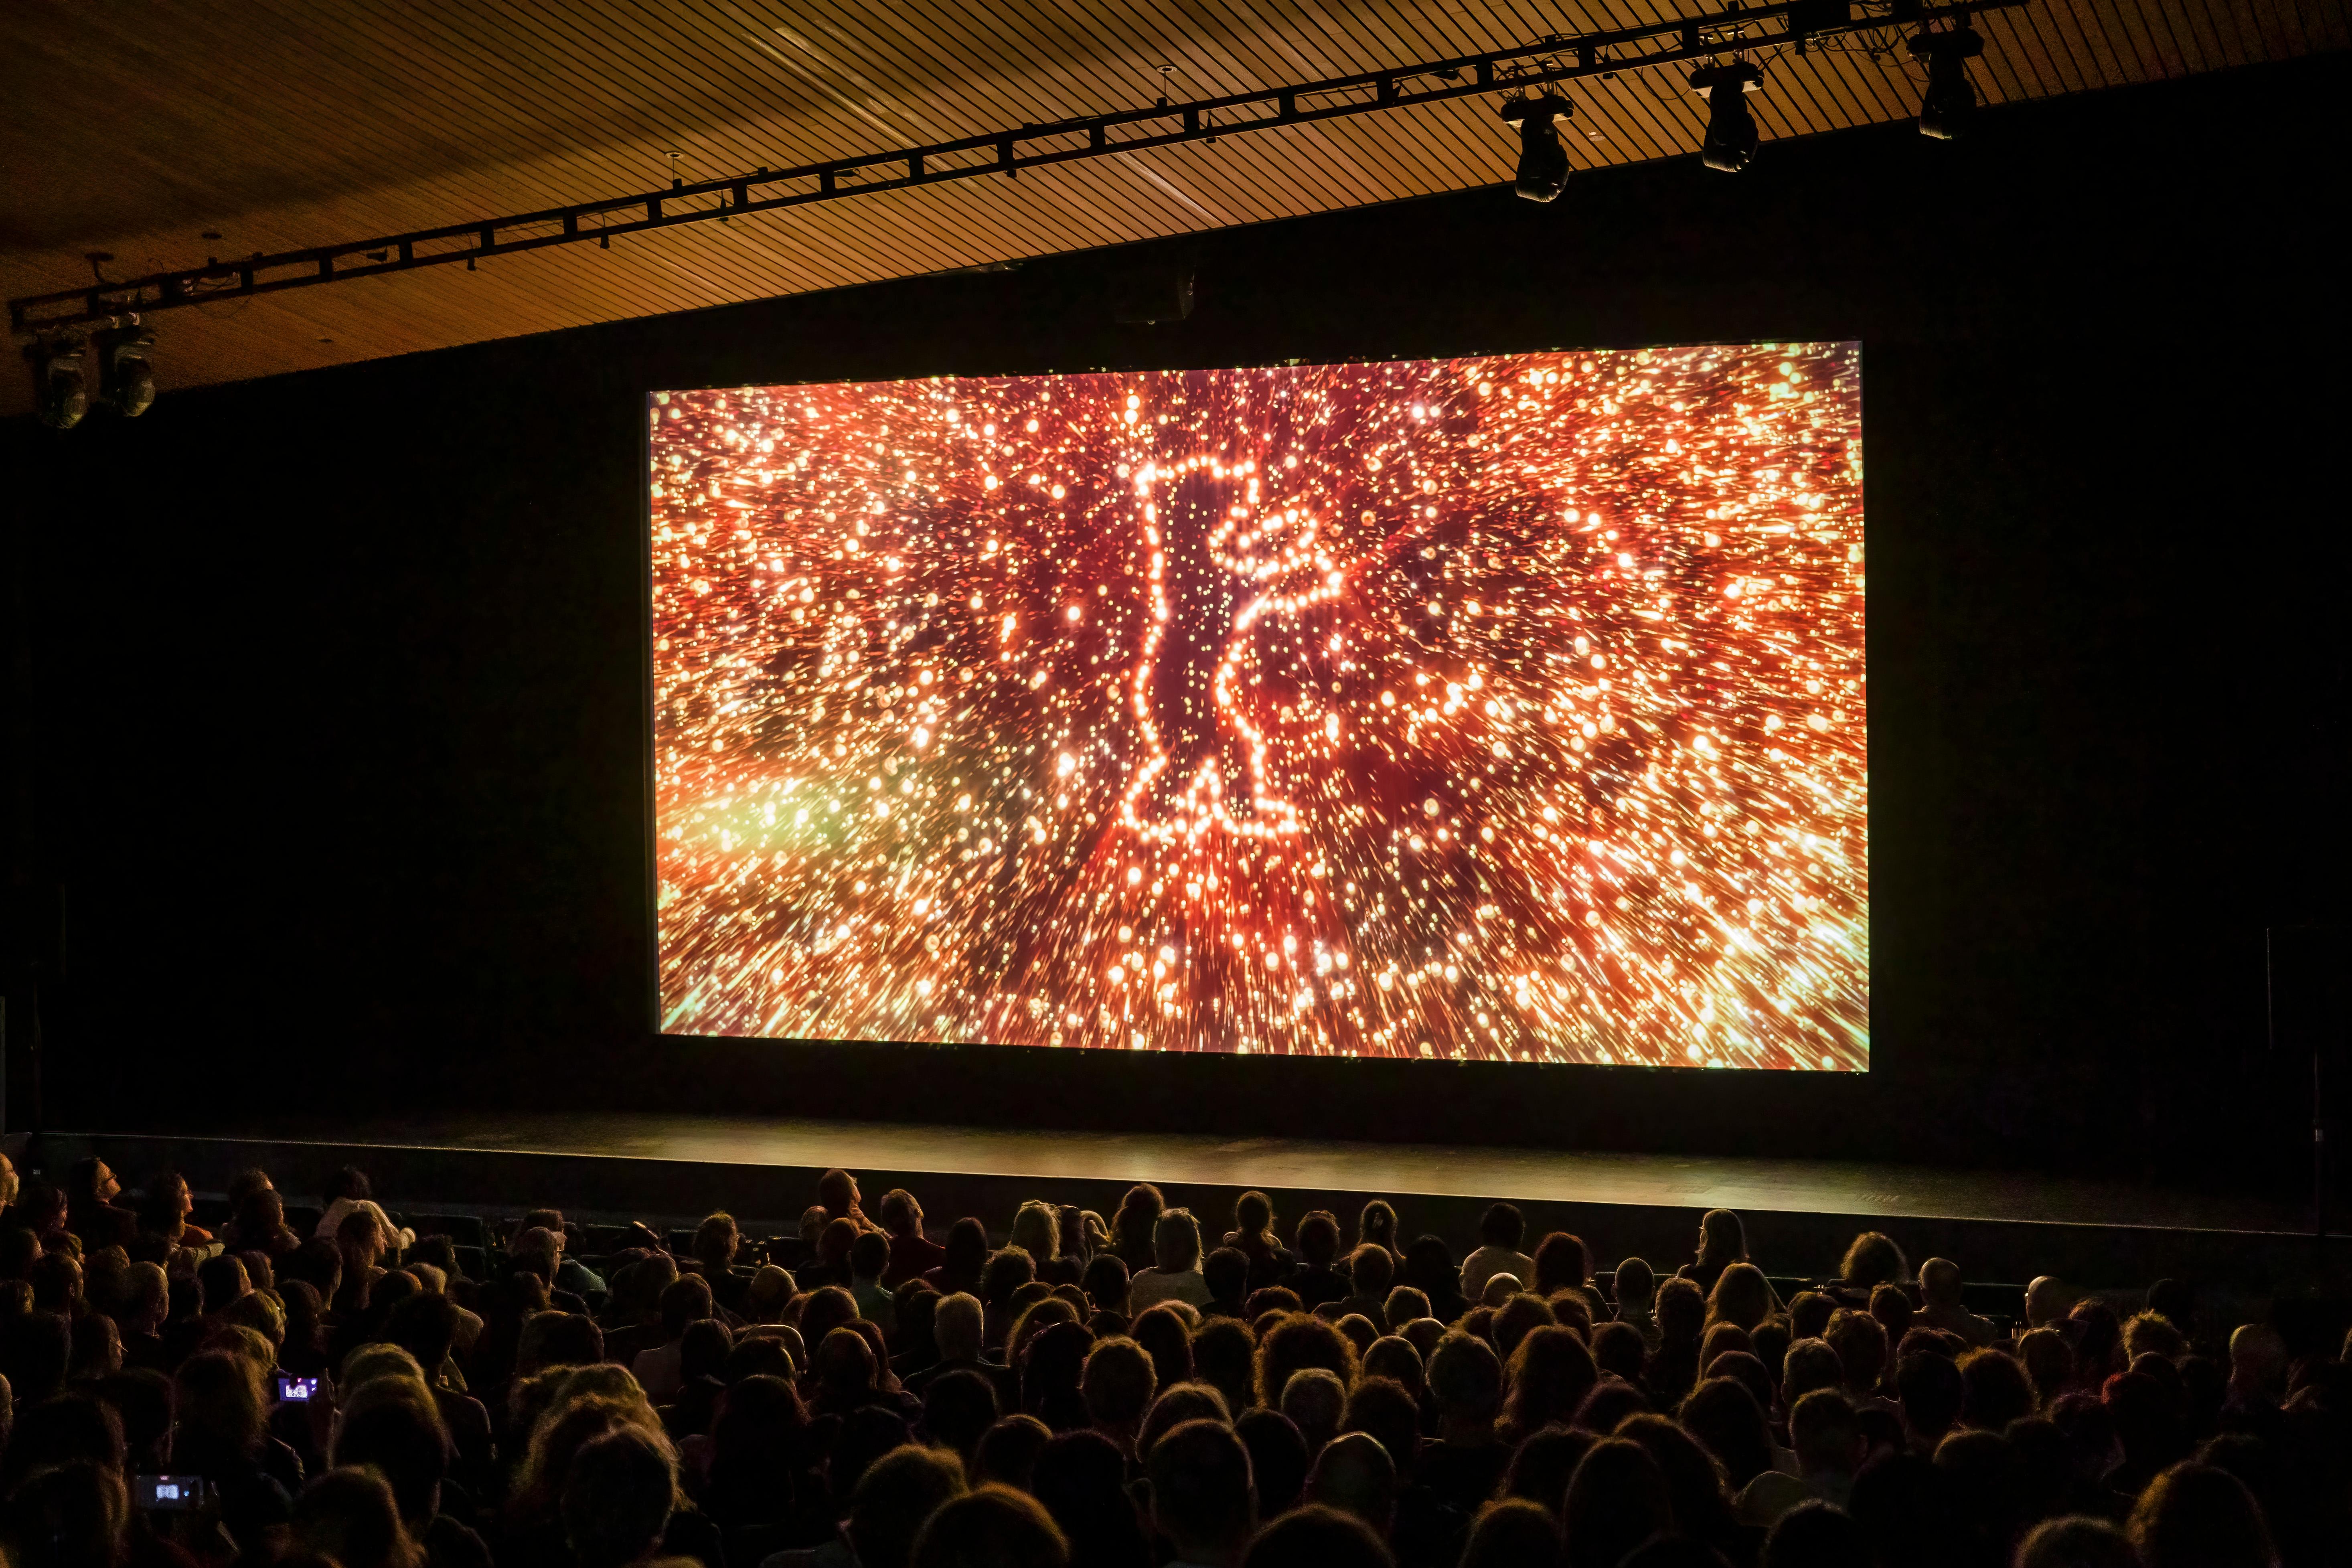 The cinema hall of the Akademie der Künste with audience. The trailer of the Berlinale can be seen on the screen. The trailer shot shows the Berlinale Bear in the glowing fireworks.